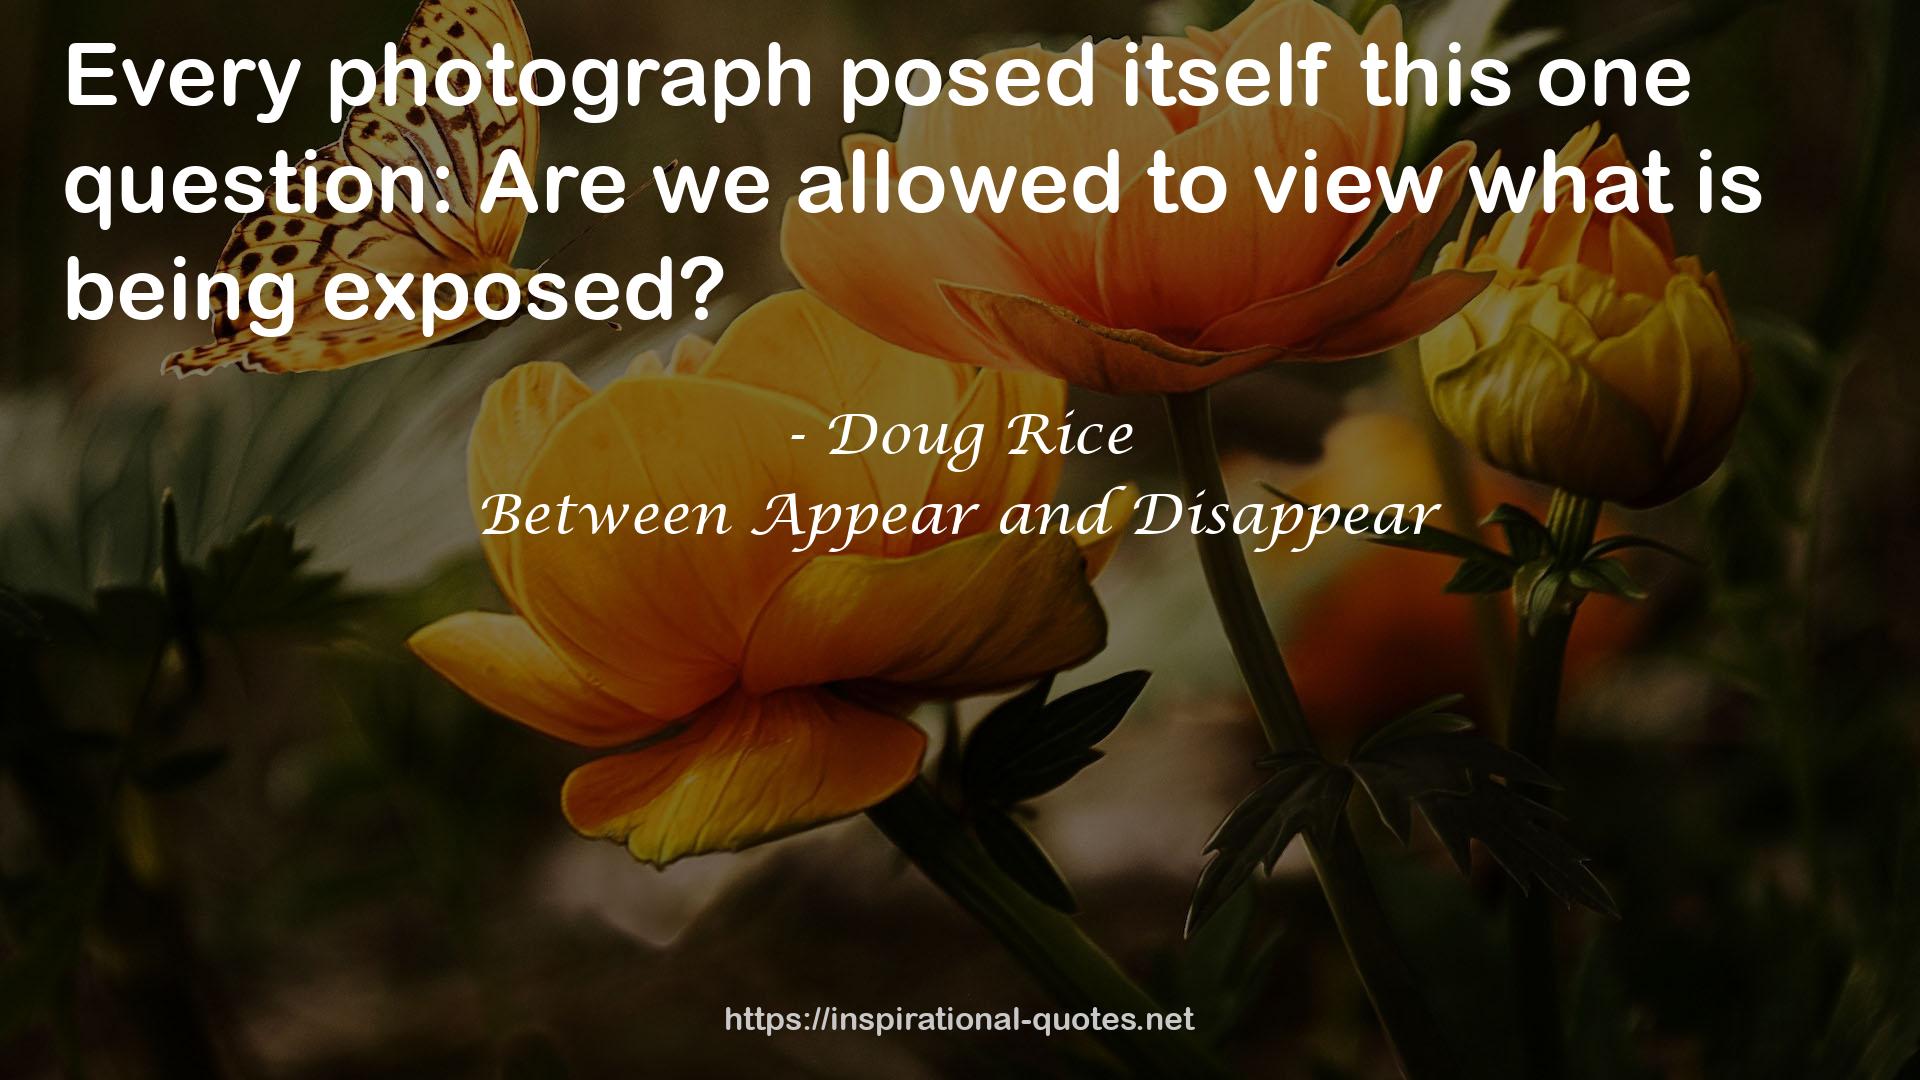 Between Appear and Disappear QUOTES